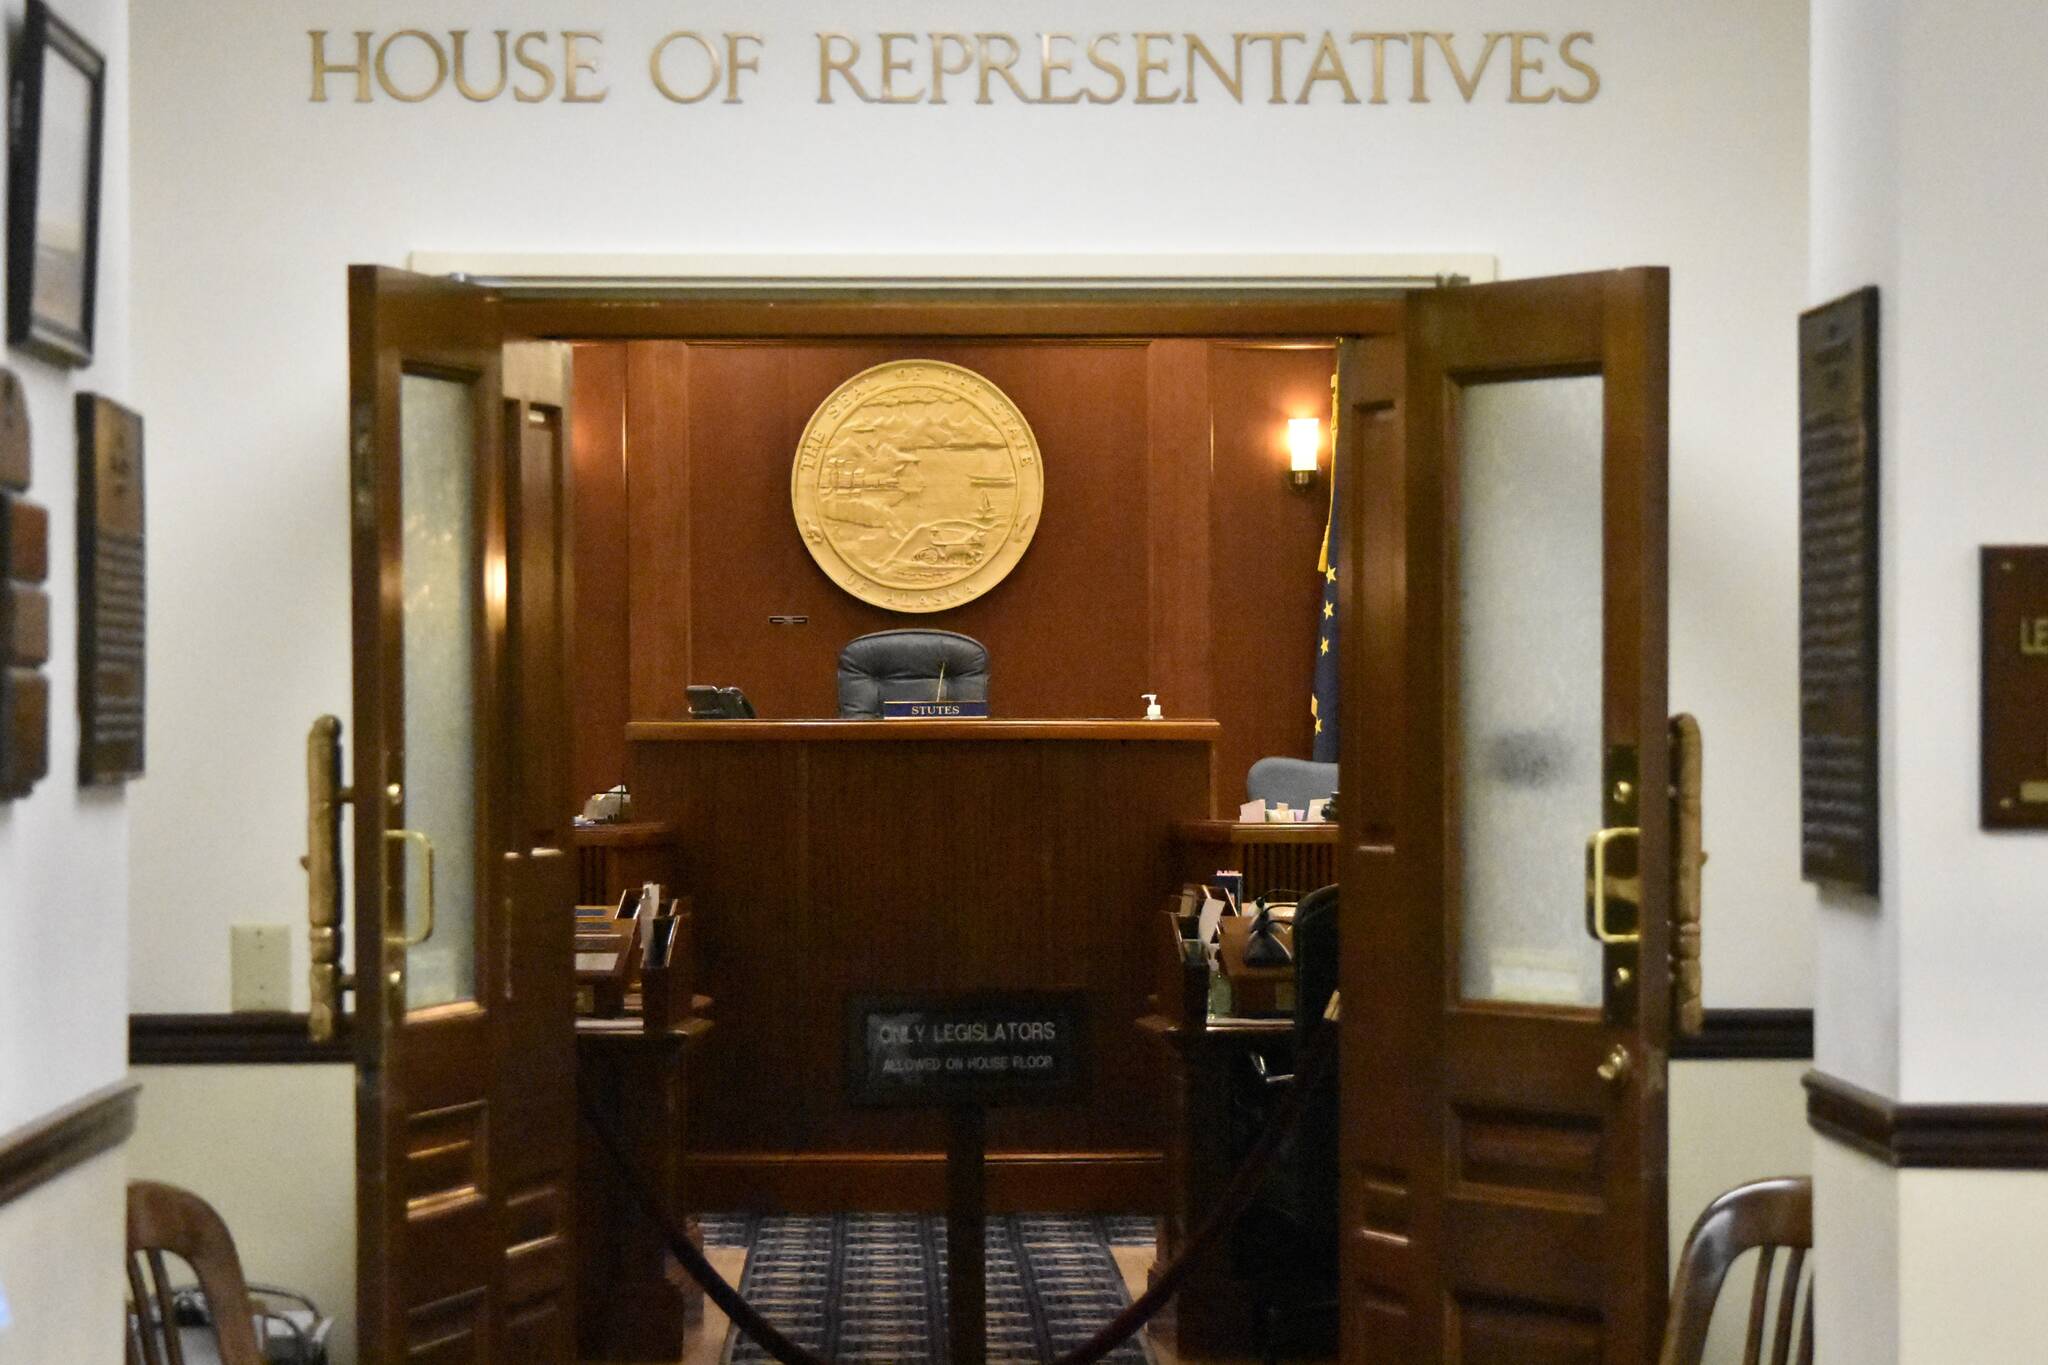 A scheduled floor session of the Alaska House of Representatives was canceled Wednesday, Feb. 2, 2022, following a positive COVID-19 case in the body and close contacts among roughly half the members. (Peter Segall / Juneau Empire)